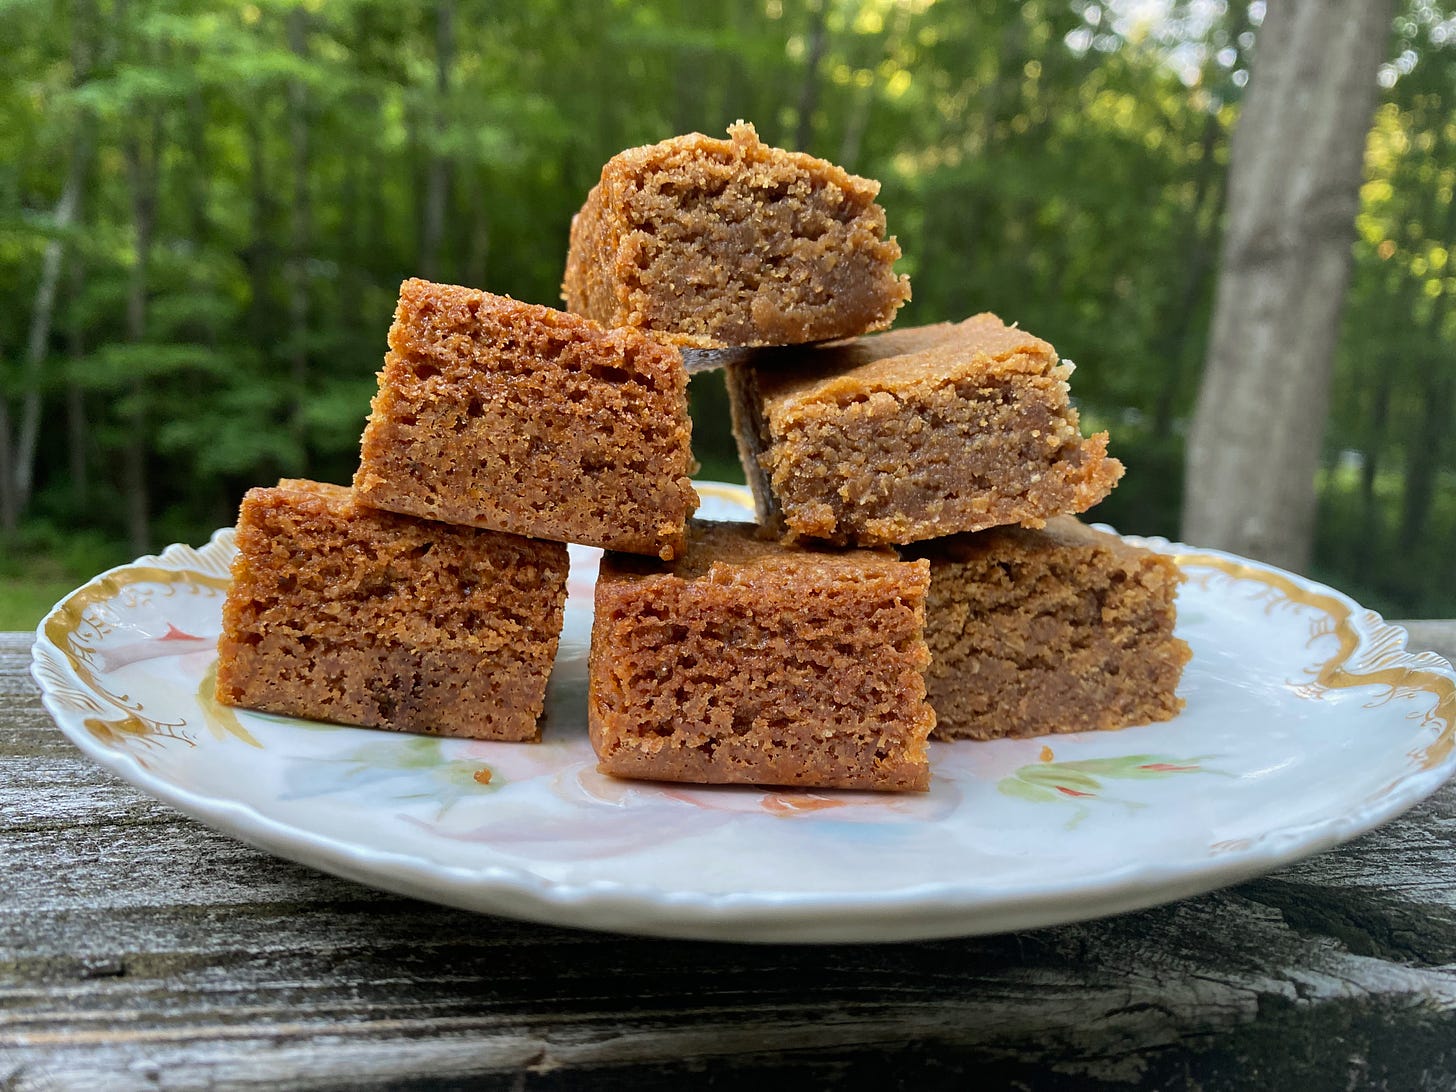 Seven butterscotch brownies stacked in a small pyramid on a ceramic plate on porch railing. Blurry trees are visible in the background.